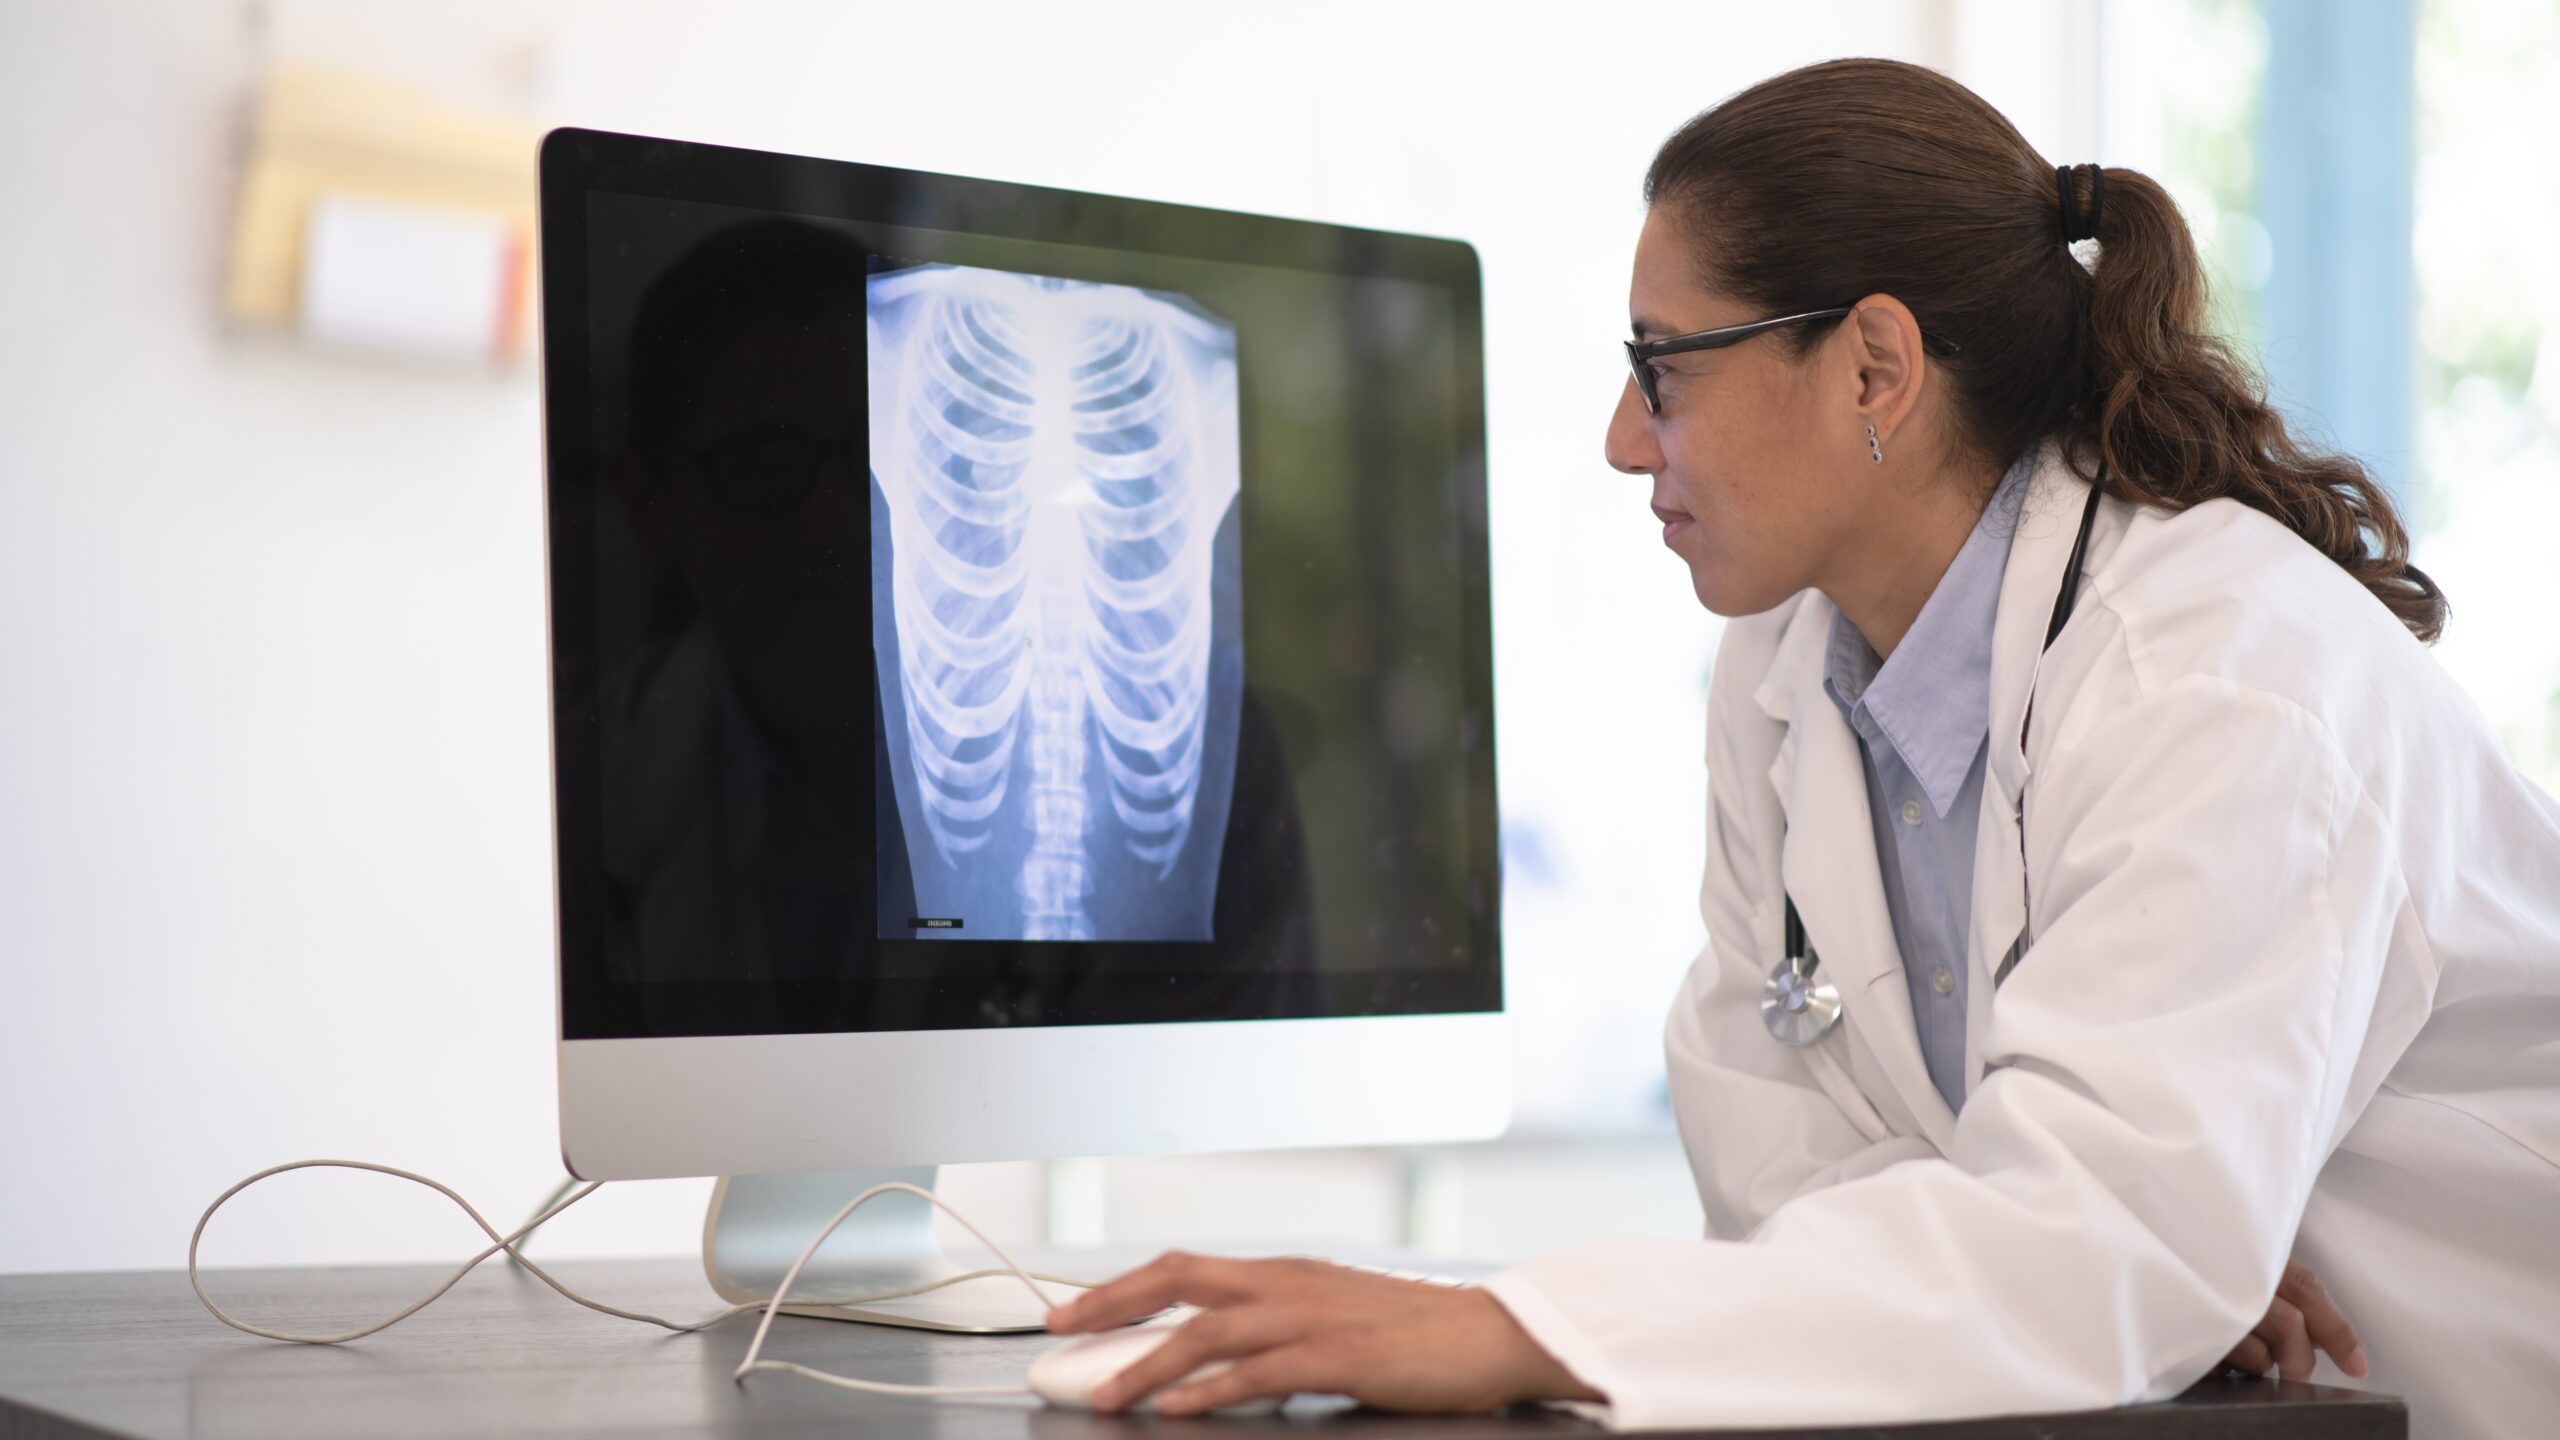 Radiologists Outperform AI in Identifying Diseases on X-ray